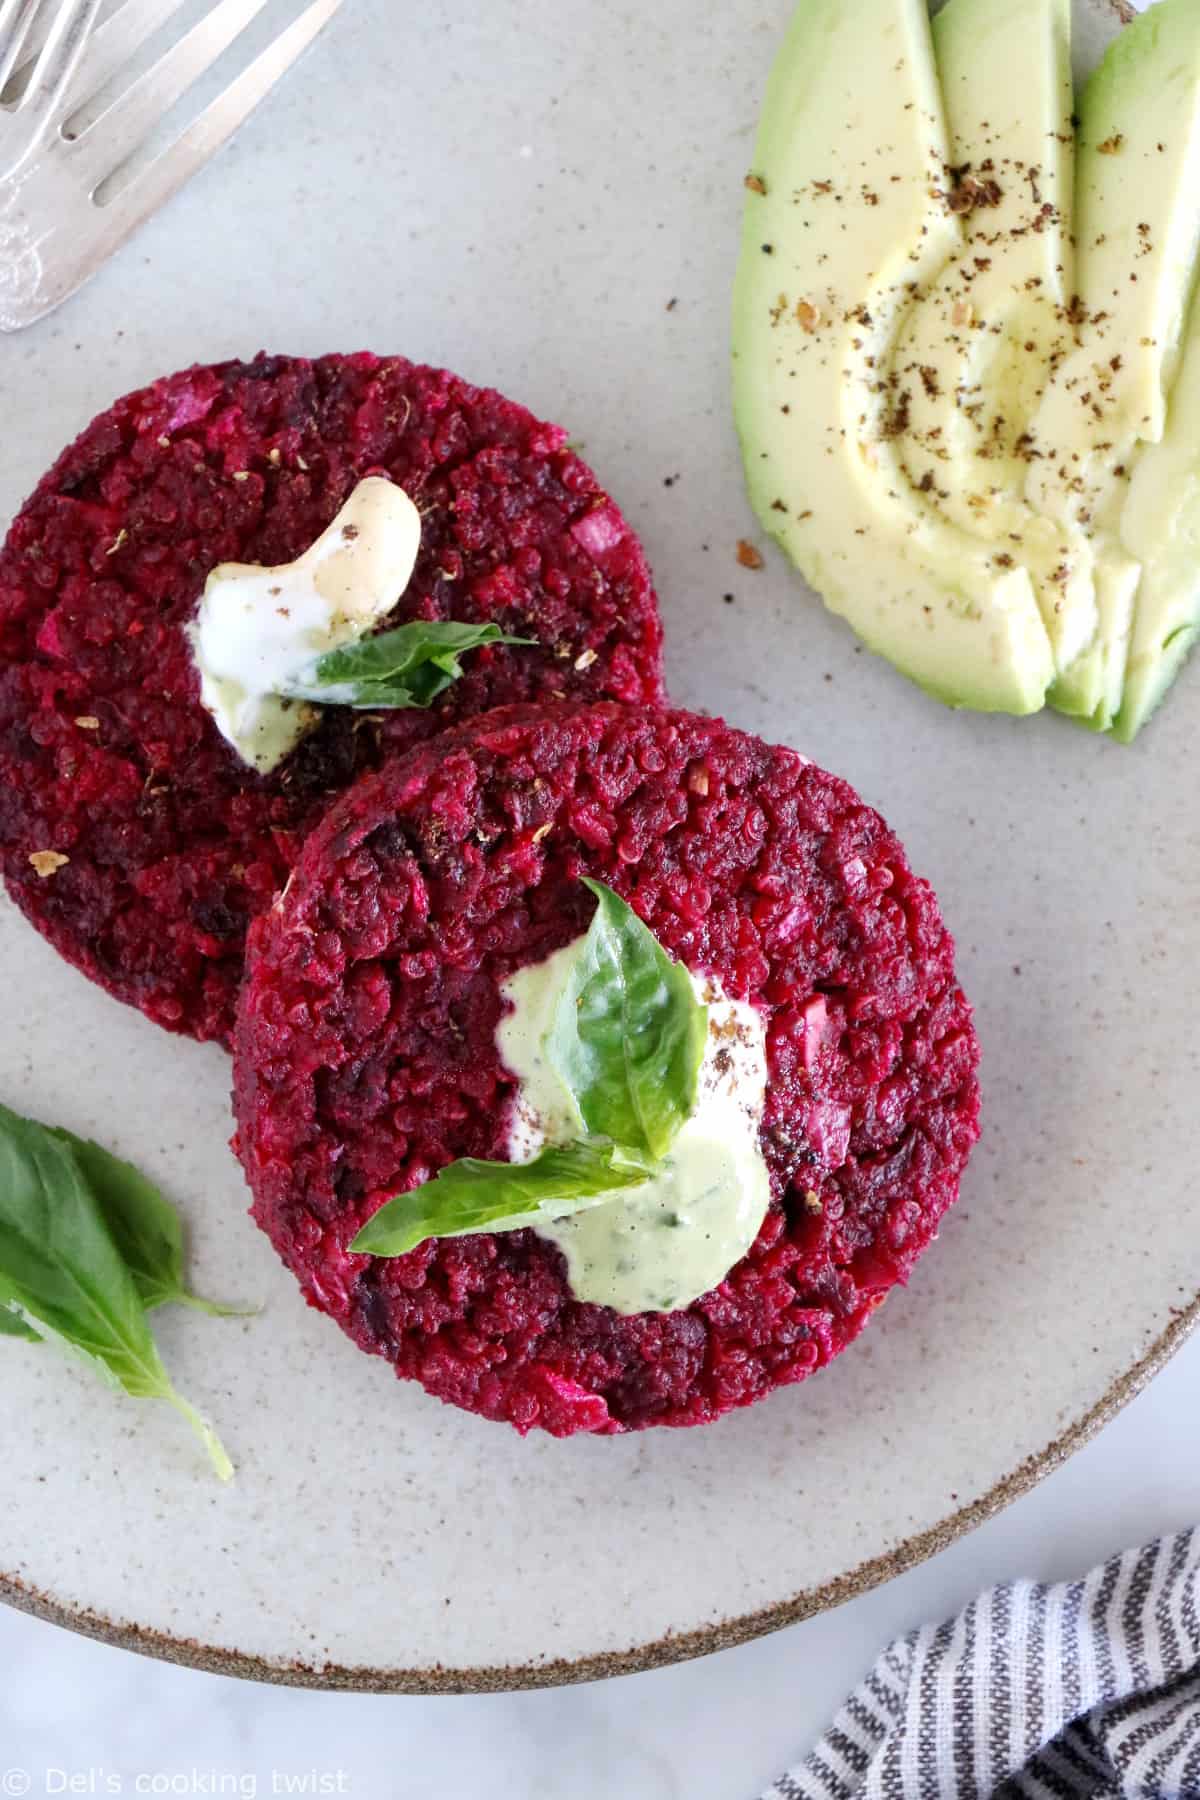 Bring colors to your meals with these veggie beet patties, prepared with beets, quinoa and ricotta cheese.